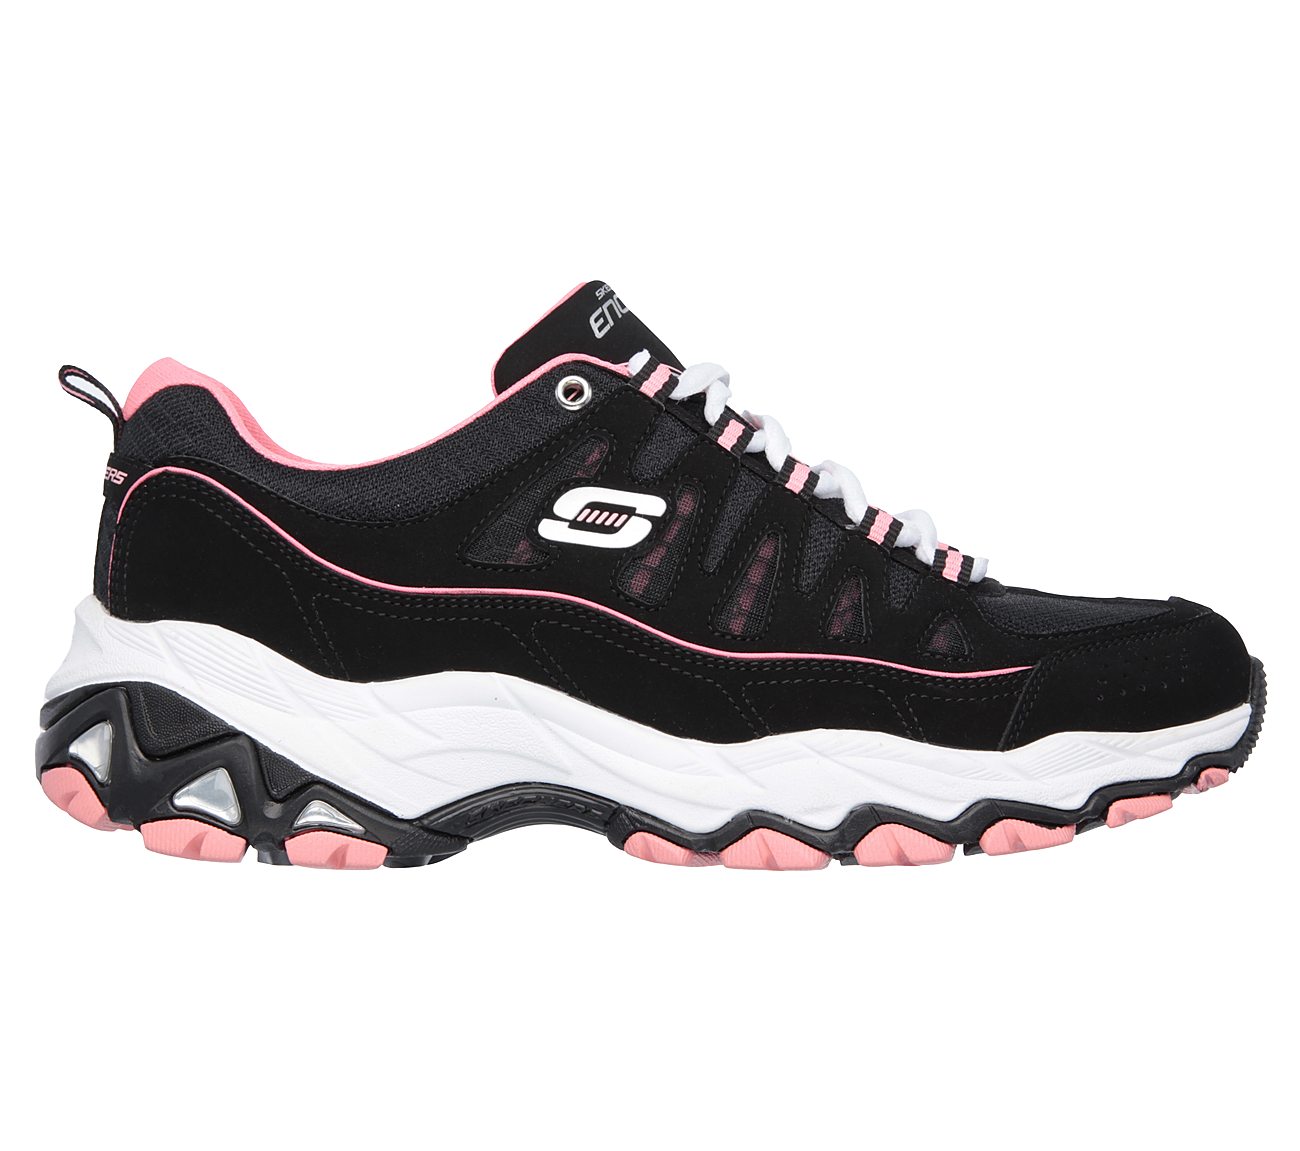 skechers discontinued shoes